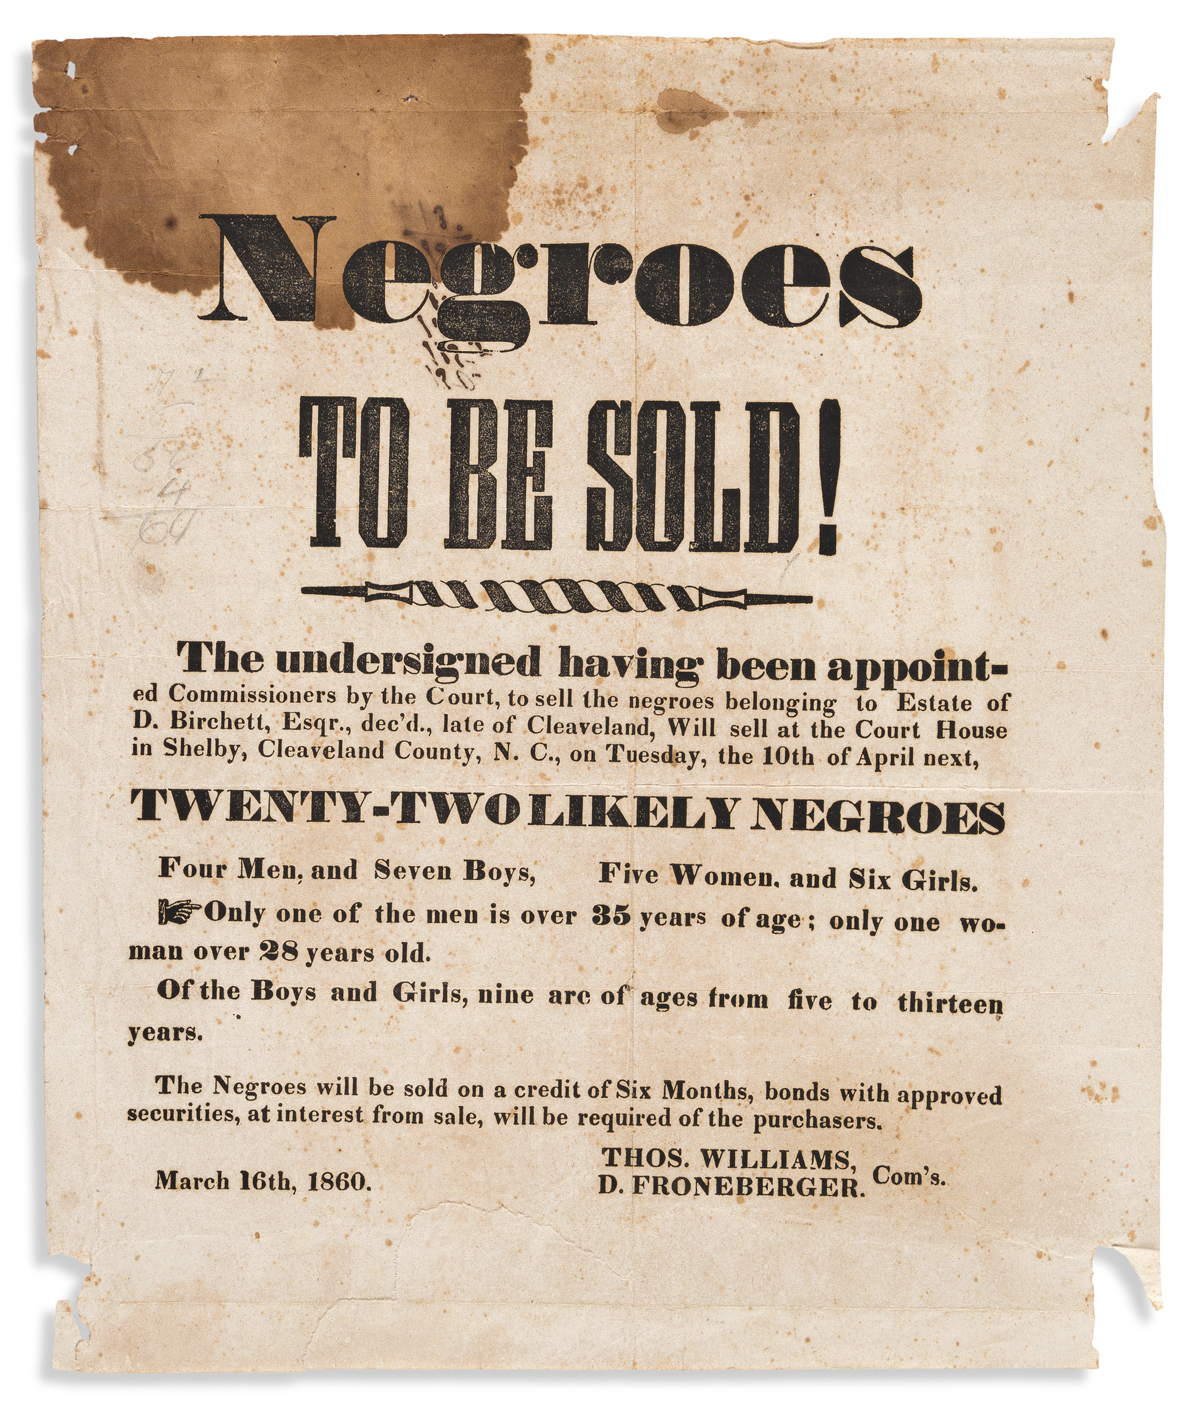 (SLAVERY AND ABOLITION.) Negroes to be Sold! . . . Twenty-Two Likely Negroes.